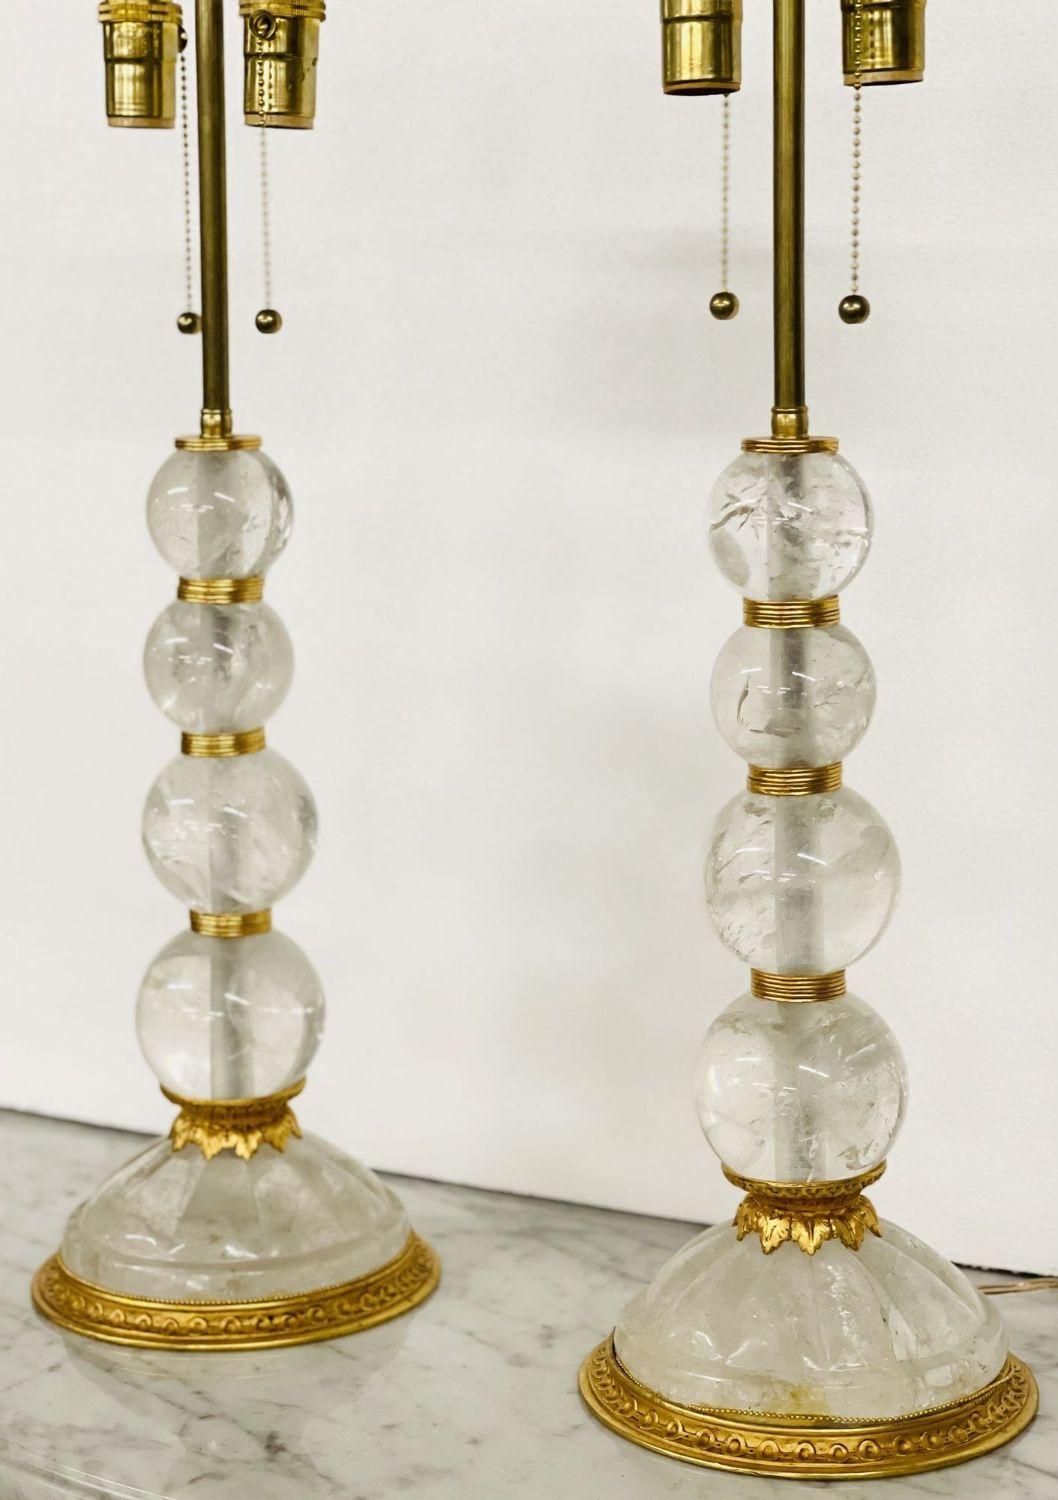 Pair of Baques Rock Crystal Table Lamps, 19th/20th Century For Sale 4